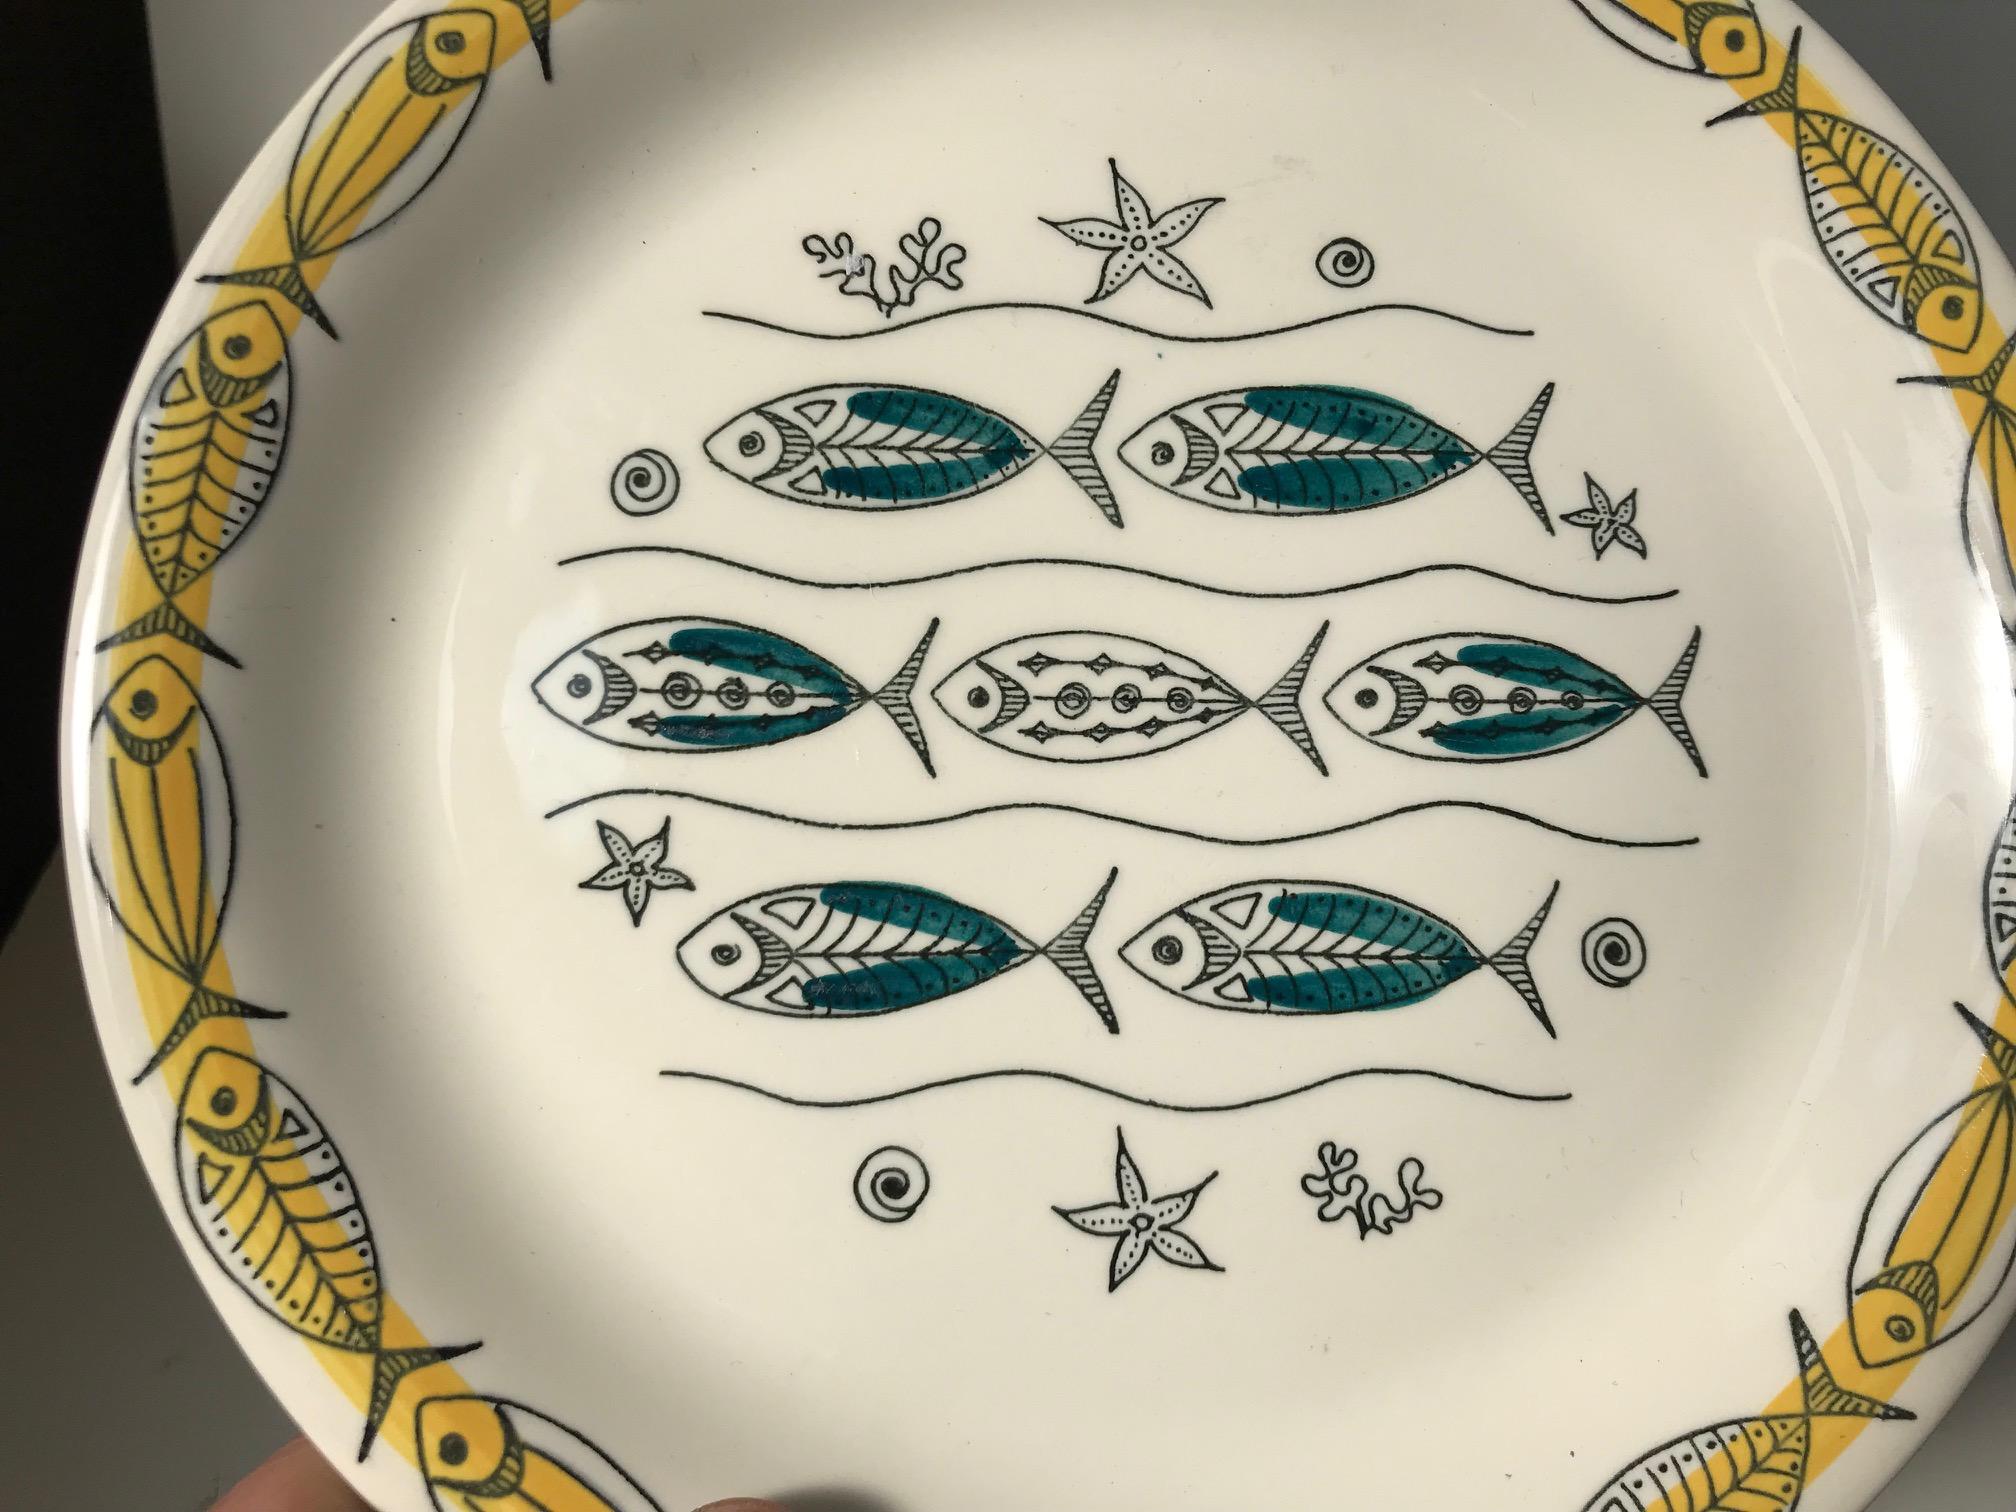 A rare set of 6 ceramic fish plates designed by Norwegian ceramist Inger Waage and manufactured by Stavangerflint during the 1950s. The plates features modernistic fish motifs and characteristic 1950s colors and graphics. The price is for the set.